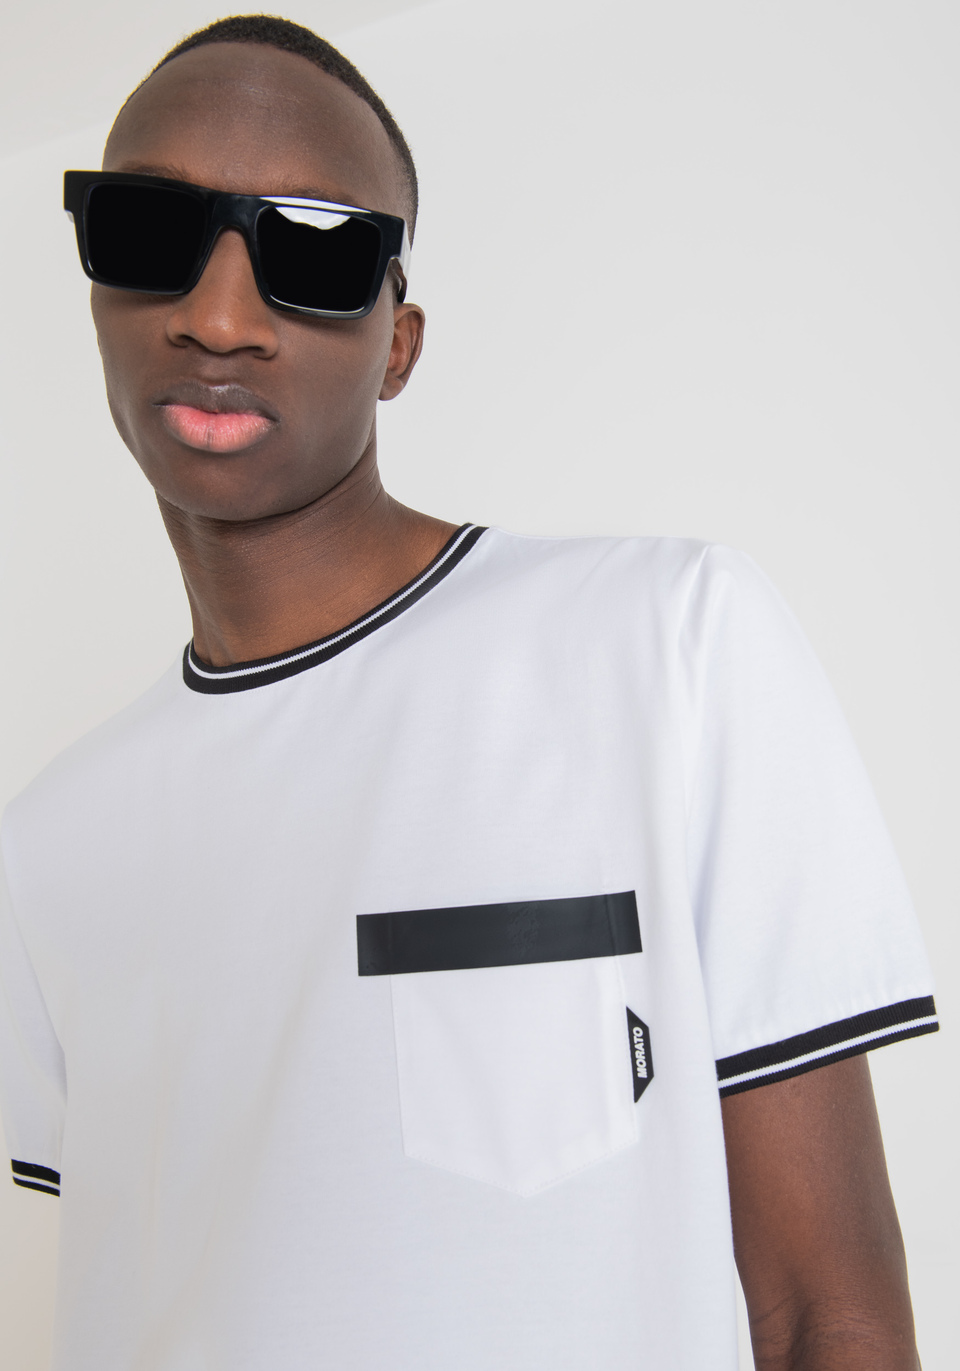 SLIM FIT T-SHIRT IN COTTON WITH RUBBERISED POCKET - Antony Morato Online Shop